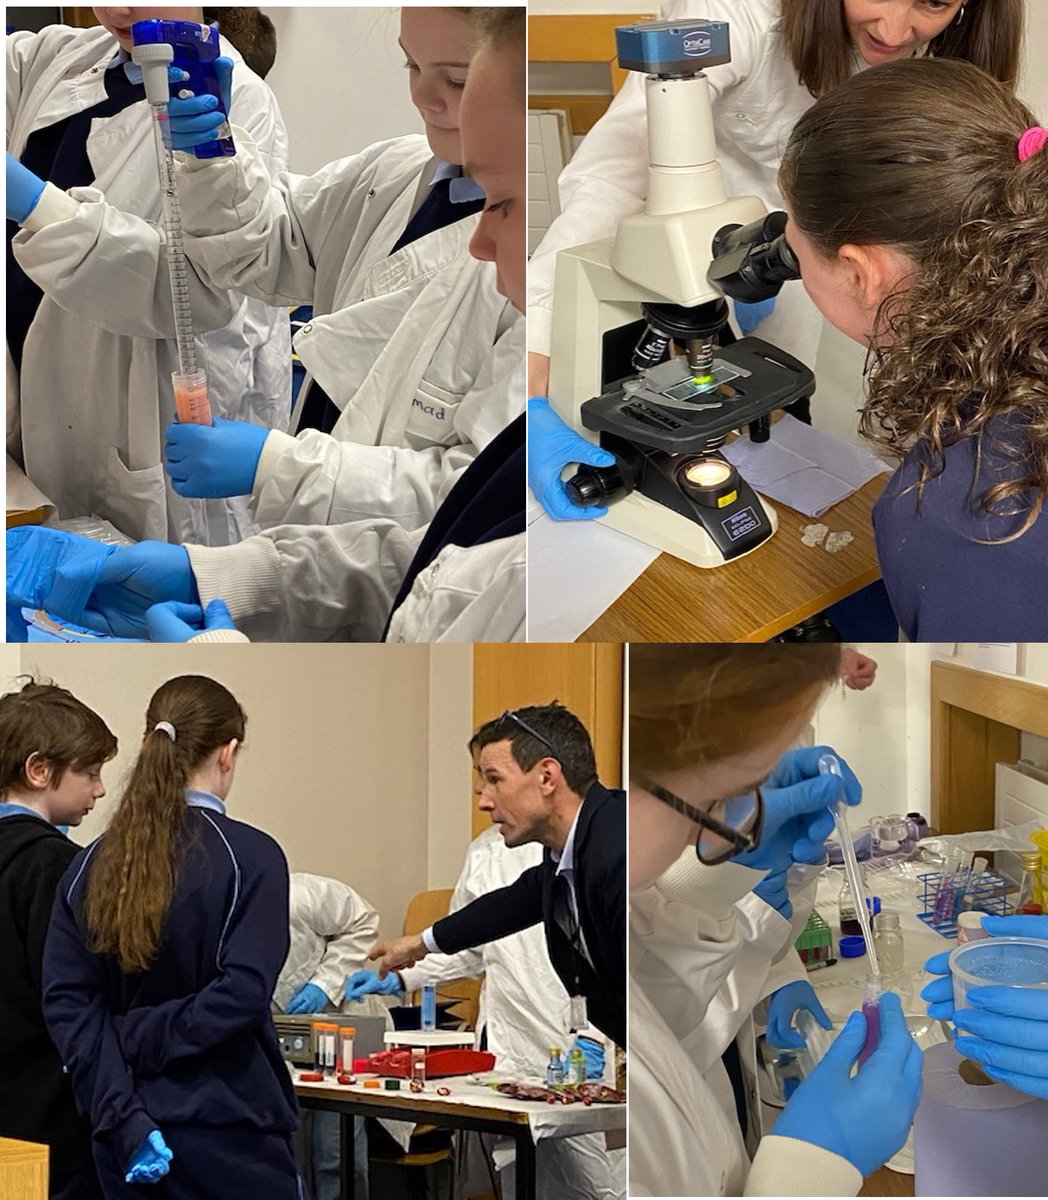 Our TTMI Outreach committee hosted budding 5th class scientists as par of the 4th “Biomedical research in action' workshop with @TrinityAccess21 . A special thanks to organiser @daniela_tropea, teachers & volunteers from @BasdeoLab @LBCAM_TCD @Niamh_LL Tony McElligott labs